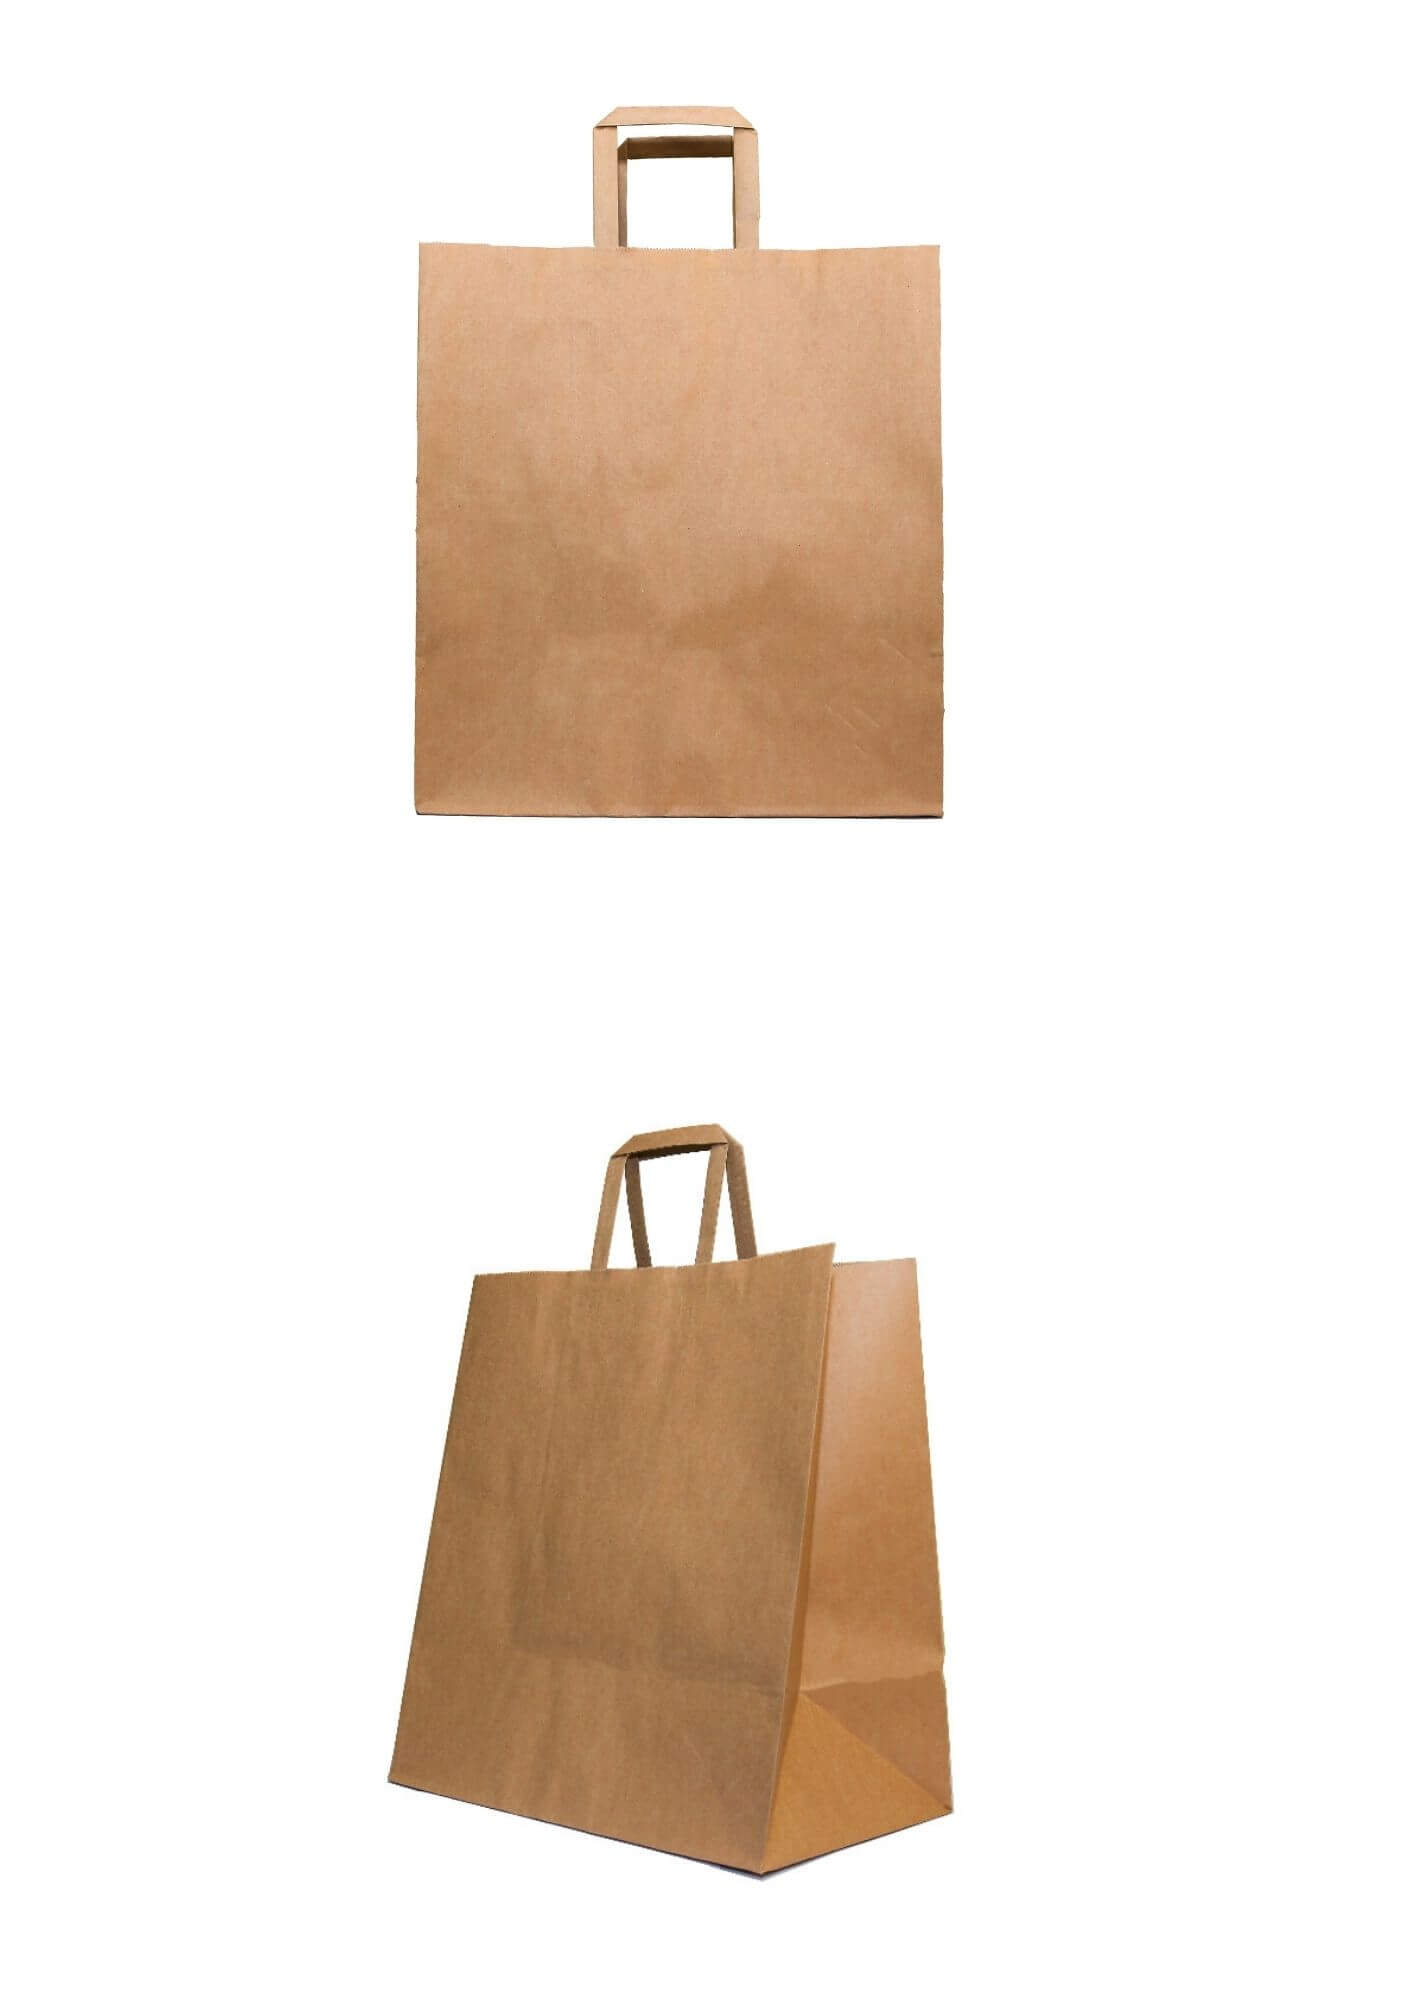 A brown kraft paper bag with flat handle made by max packaging